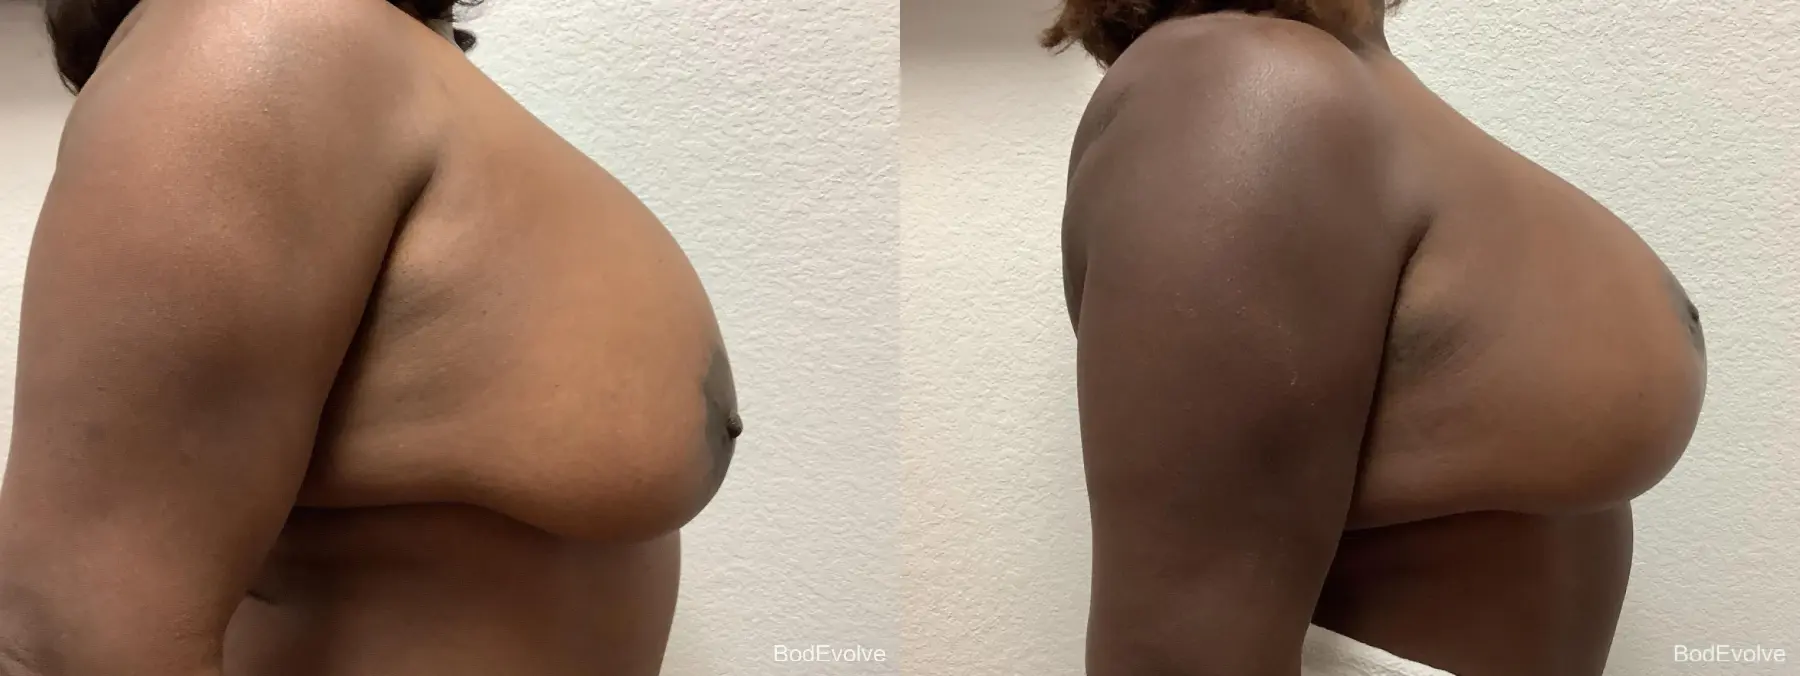 Breast Augmentation With Lift: Patient 2 - Before and After 4